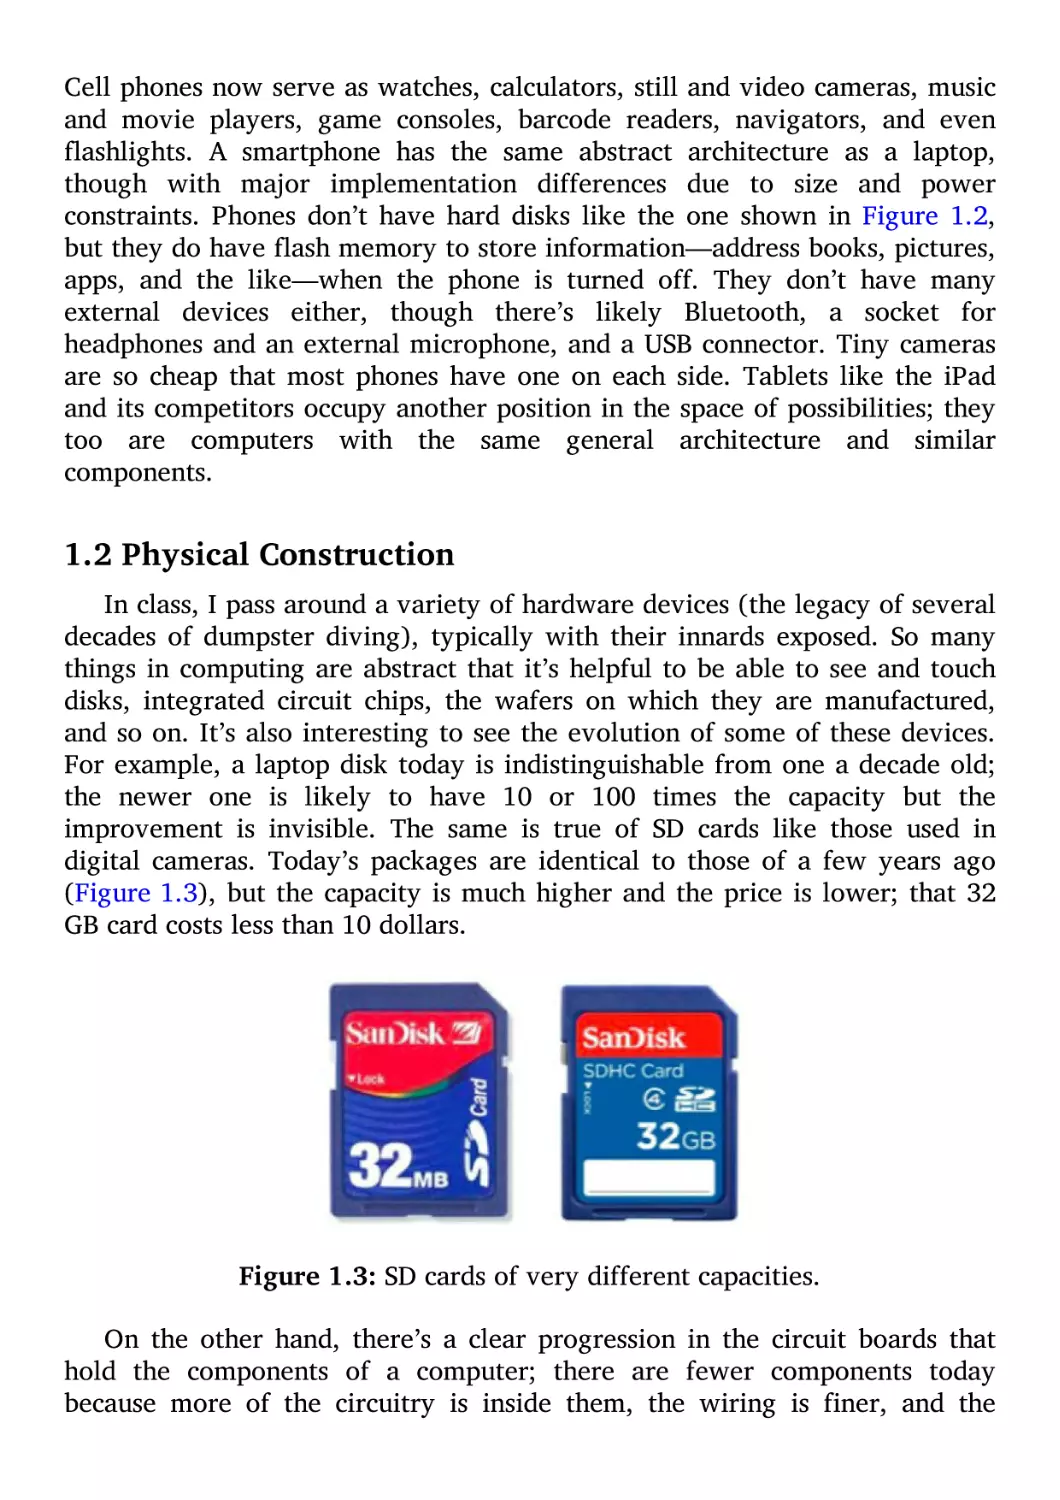 1.2 Physical Construction